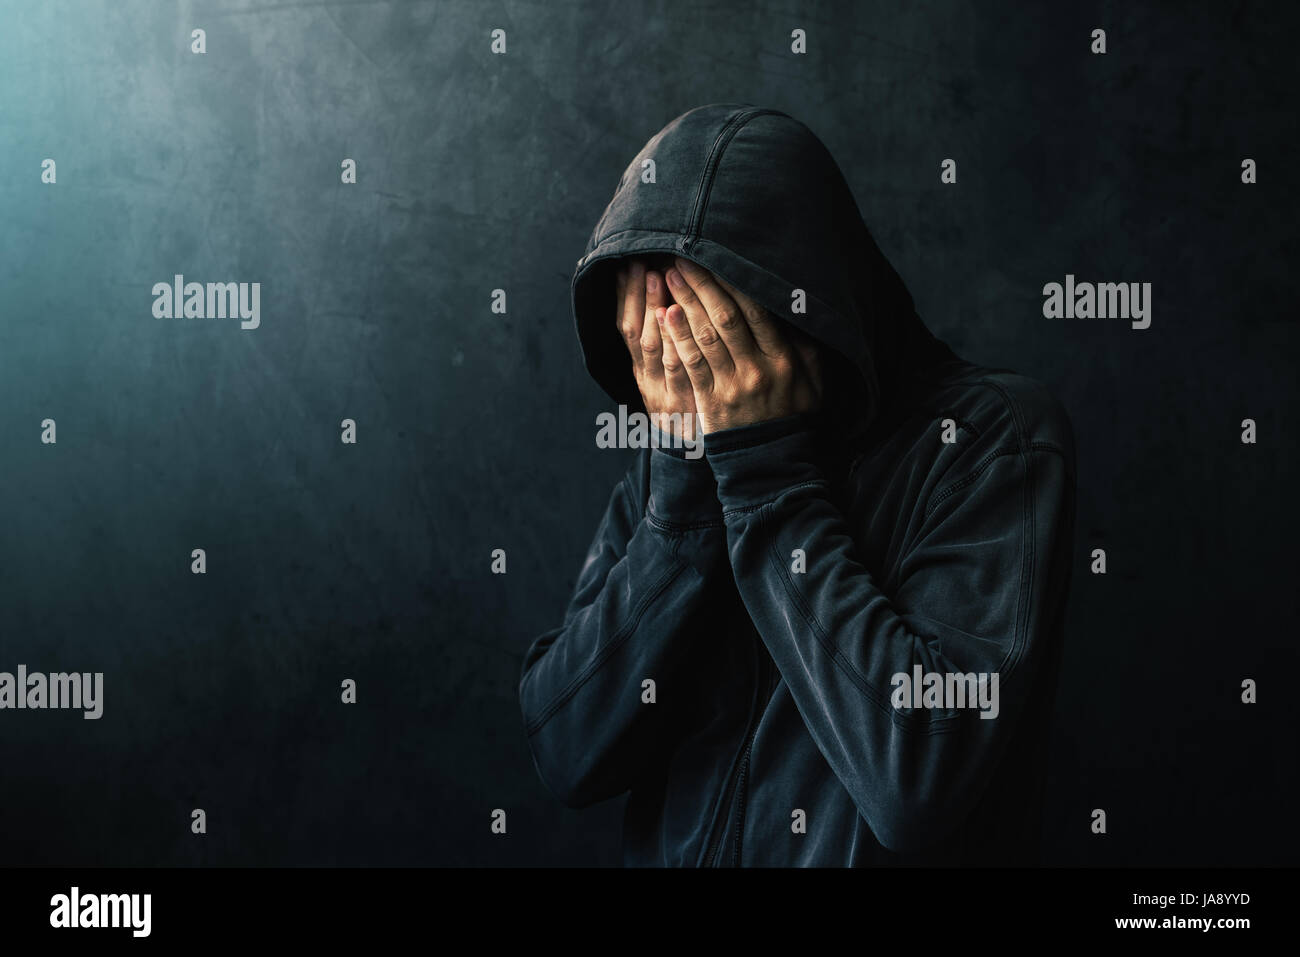 Desperate man in hooded jacket is crying, hands are covering face and tears in the eyes, light of hope shining from his right side Stock Photo